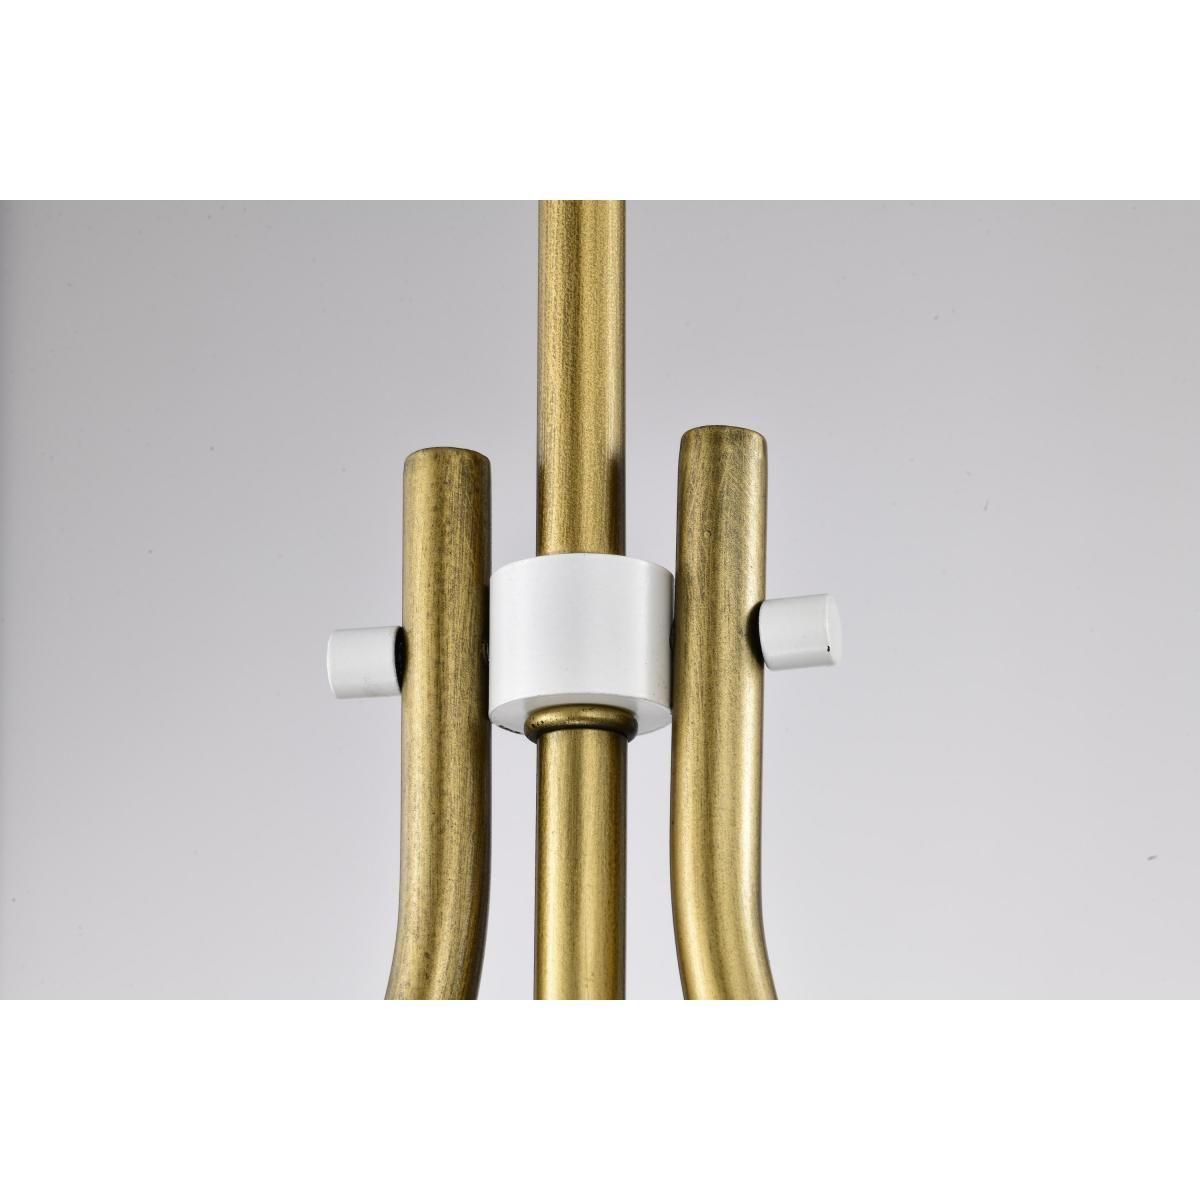 Admiral 10 in. Pendant Light Matte White and Natural Brass Finish